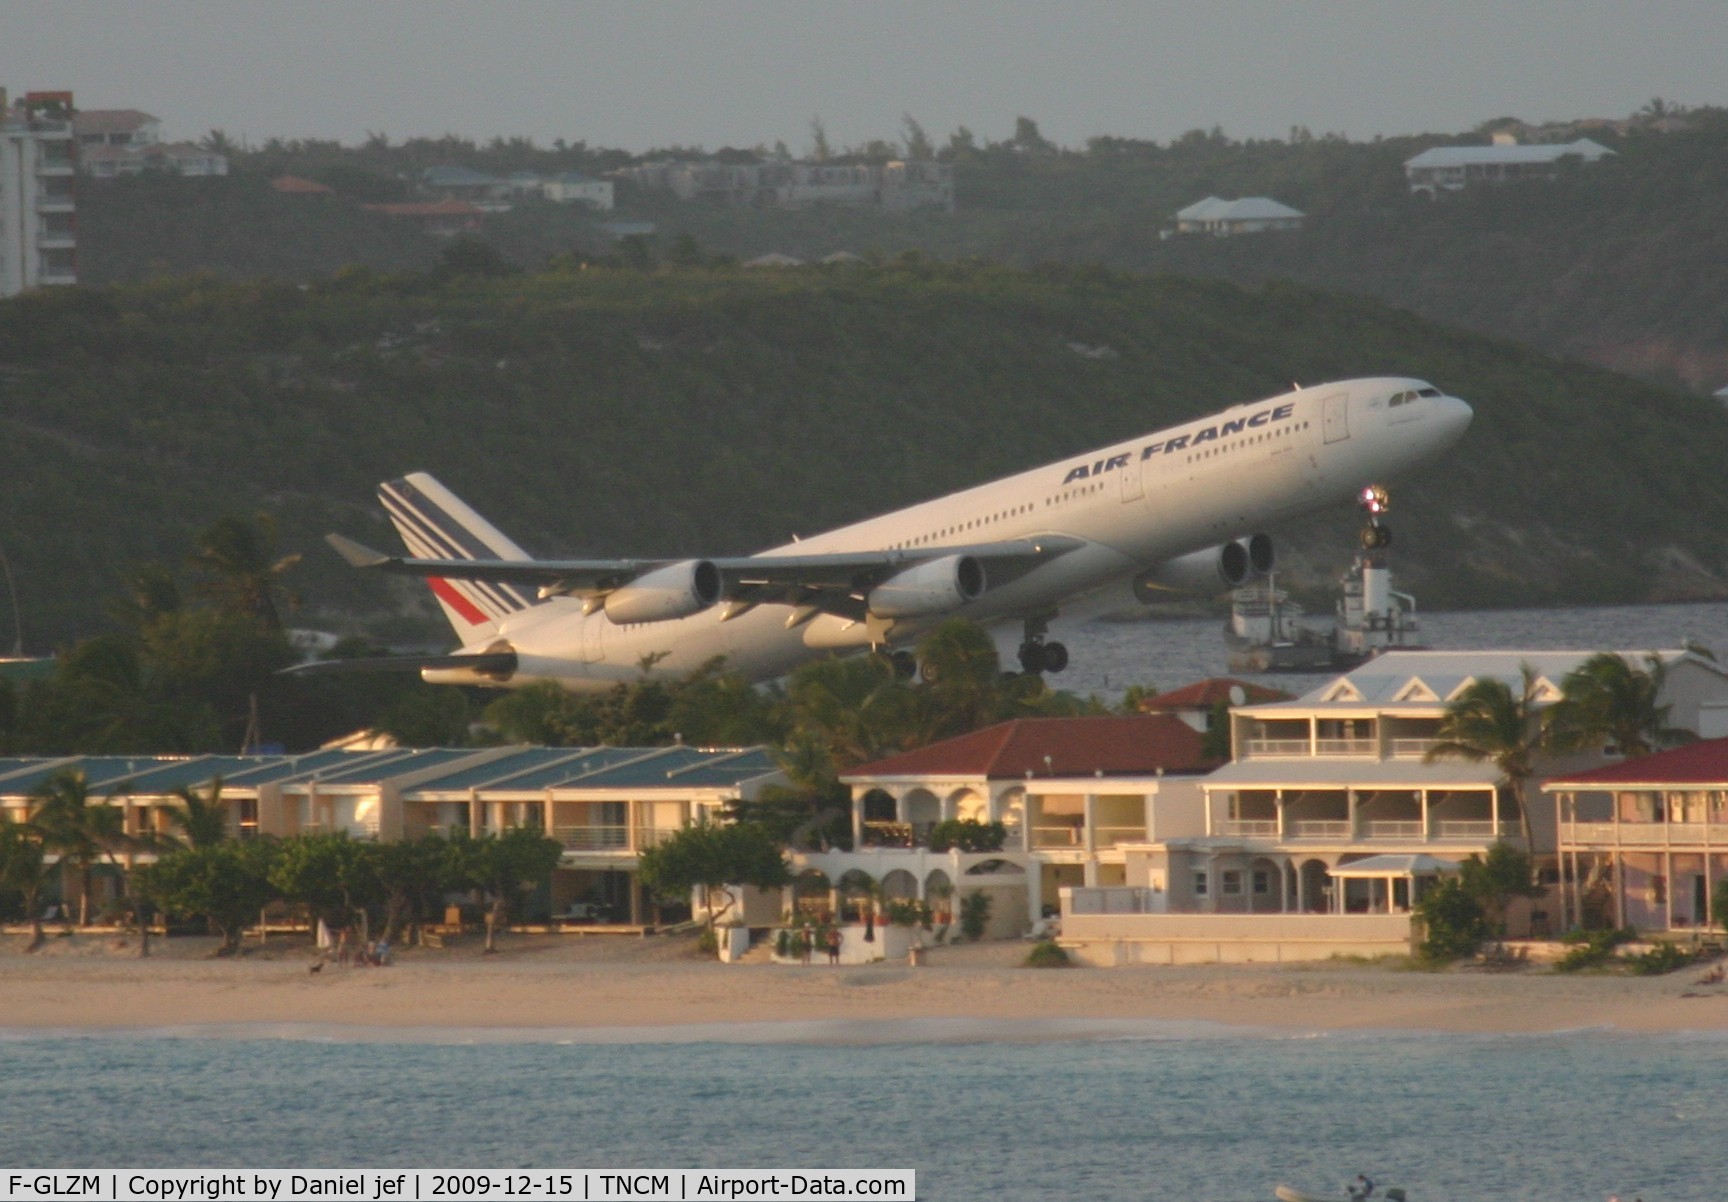 F-GLZM, 1998 Airbus A340-313X C/N 237, Airfrance F-GLZM departing St Maarten for france